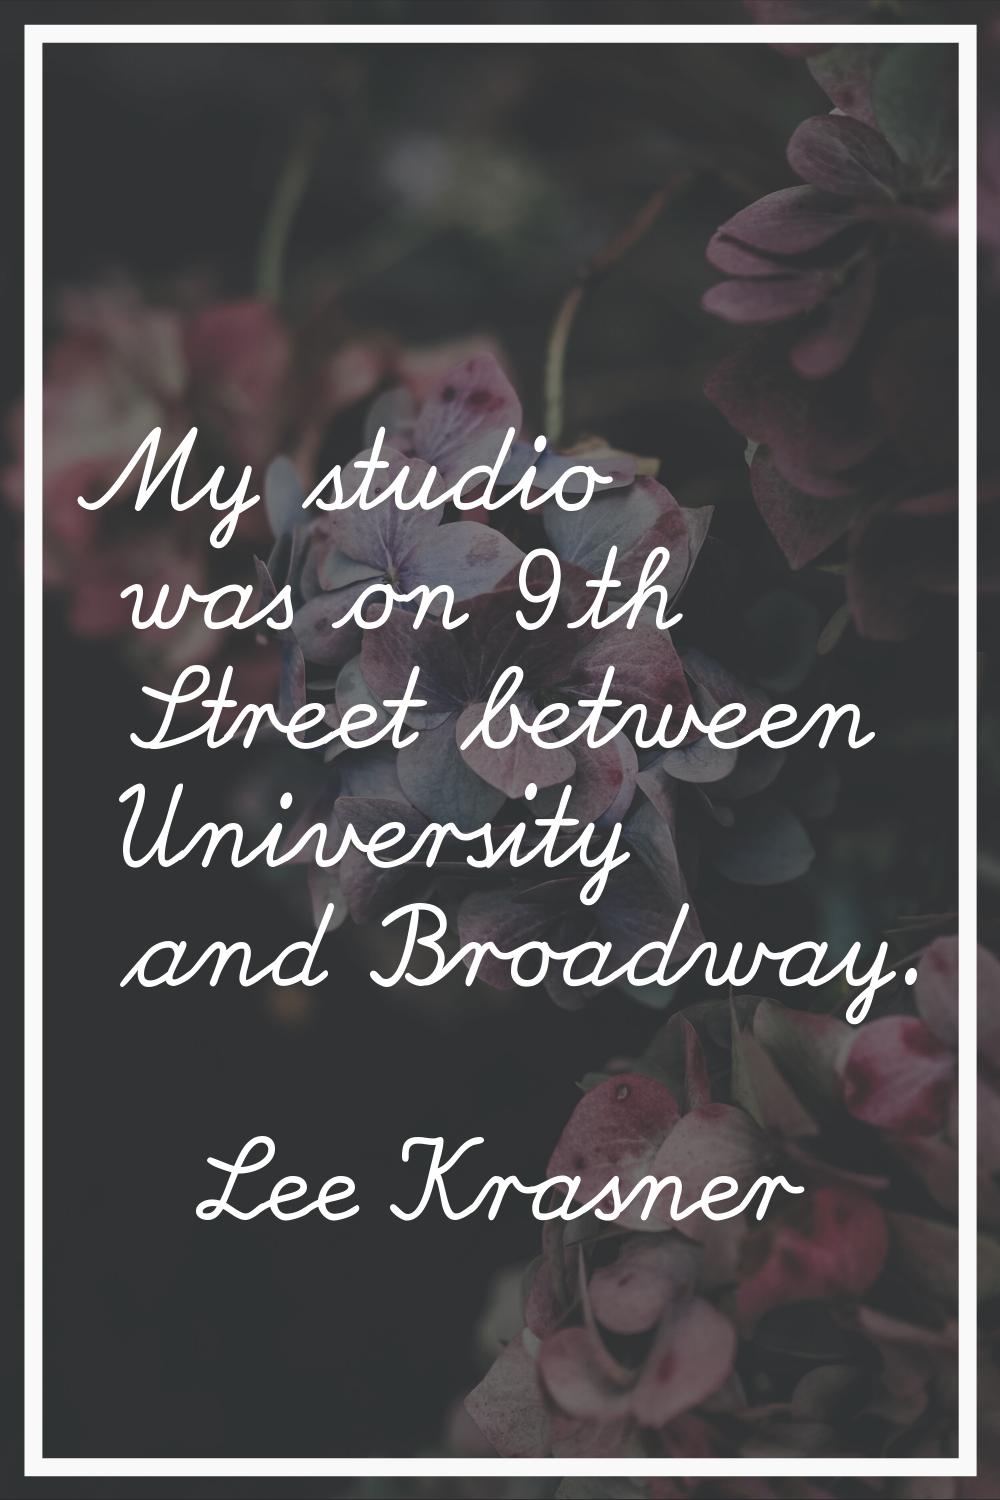 My studio was on 9th Street between University and Broadway.